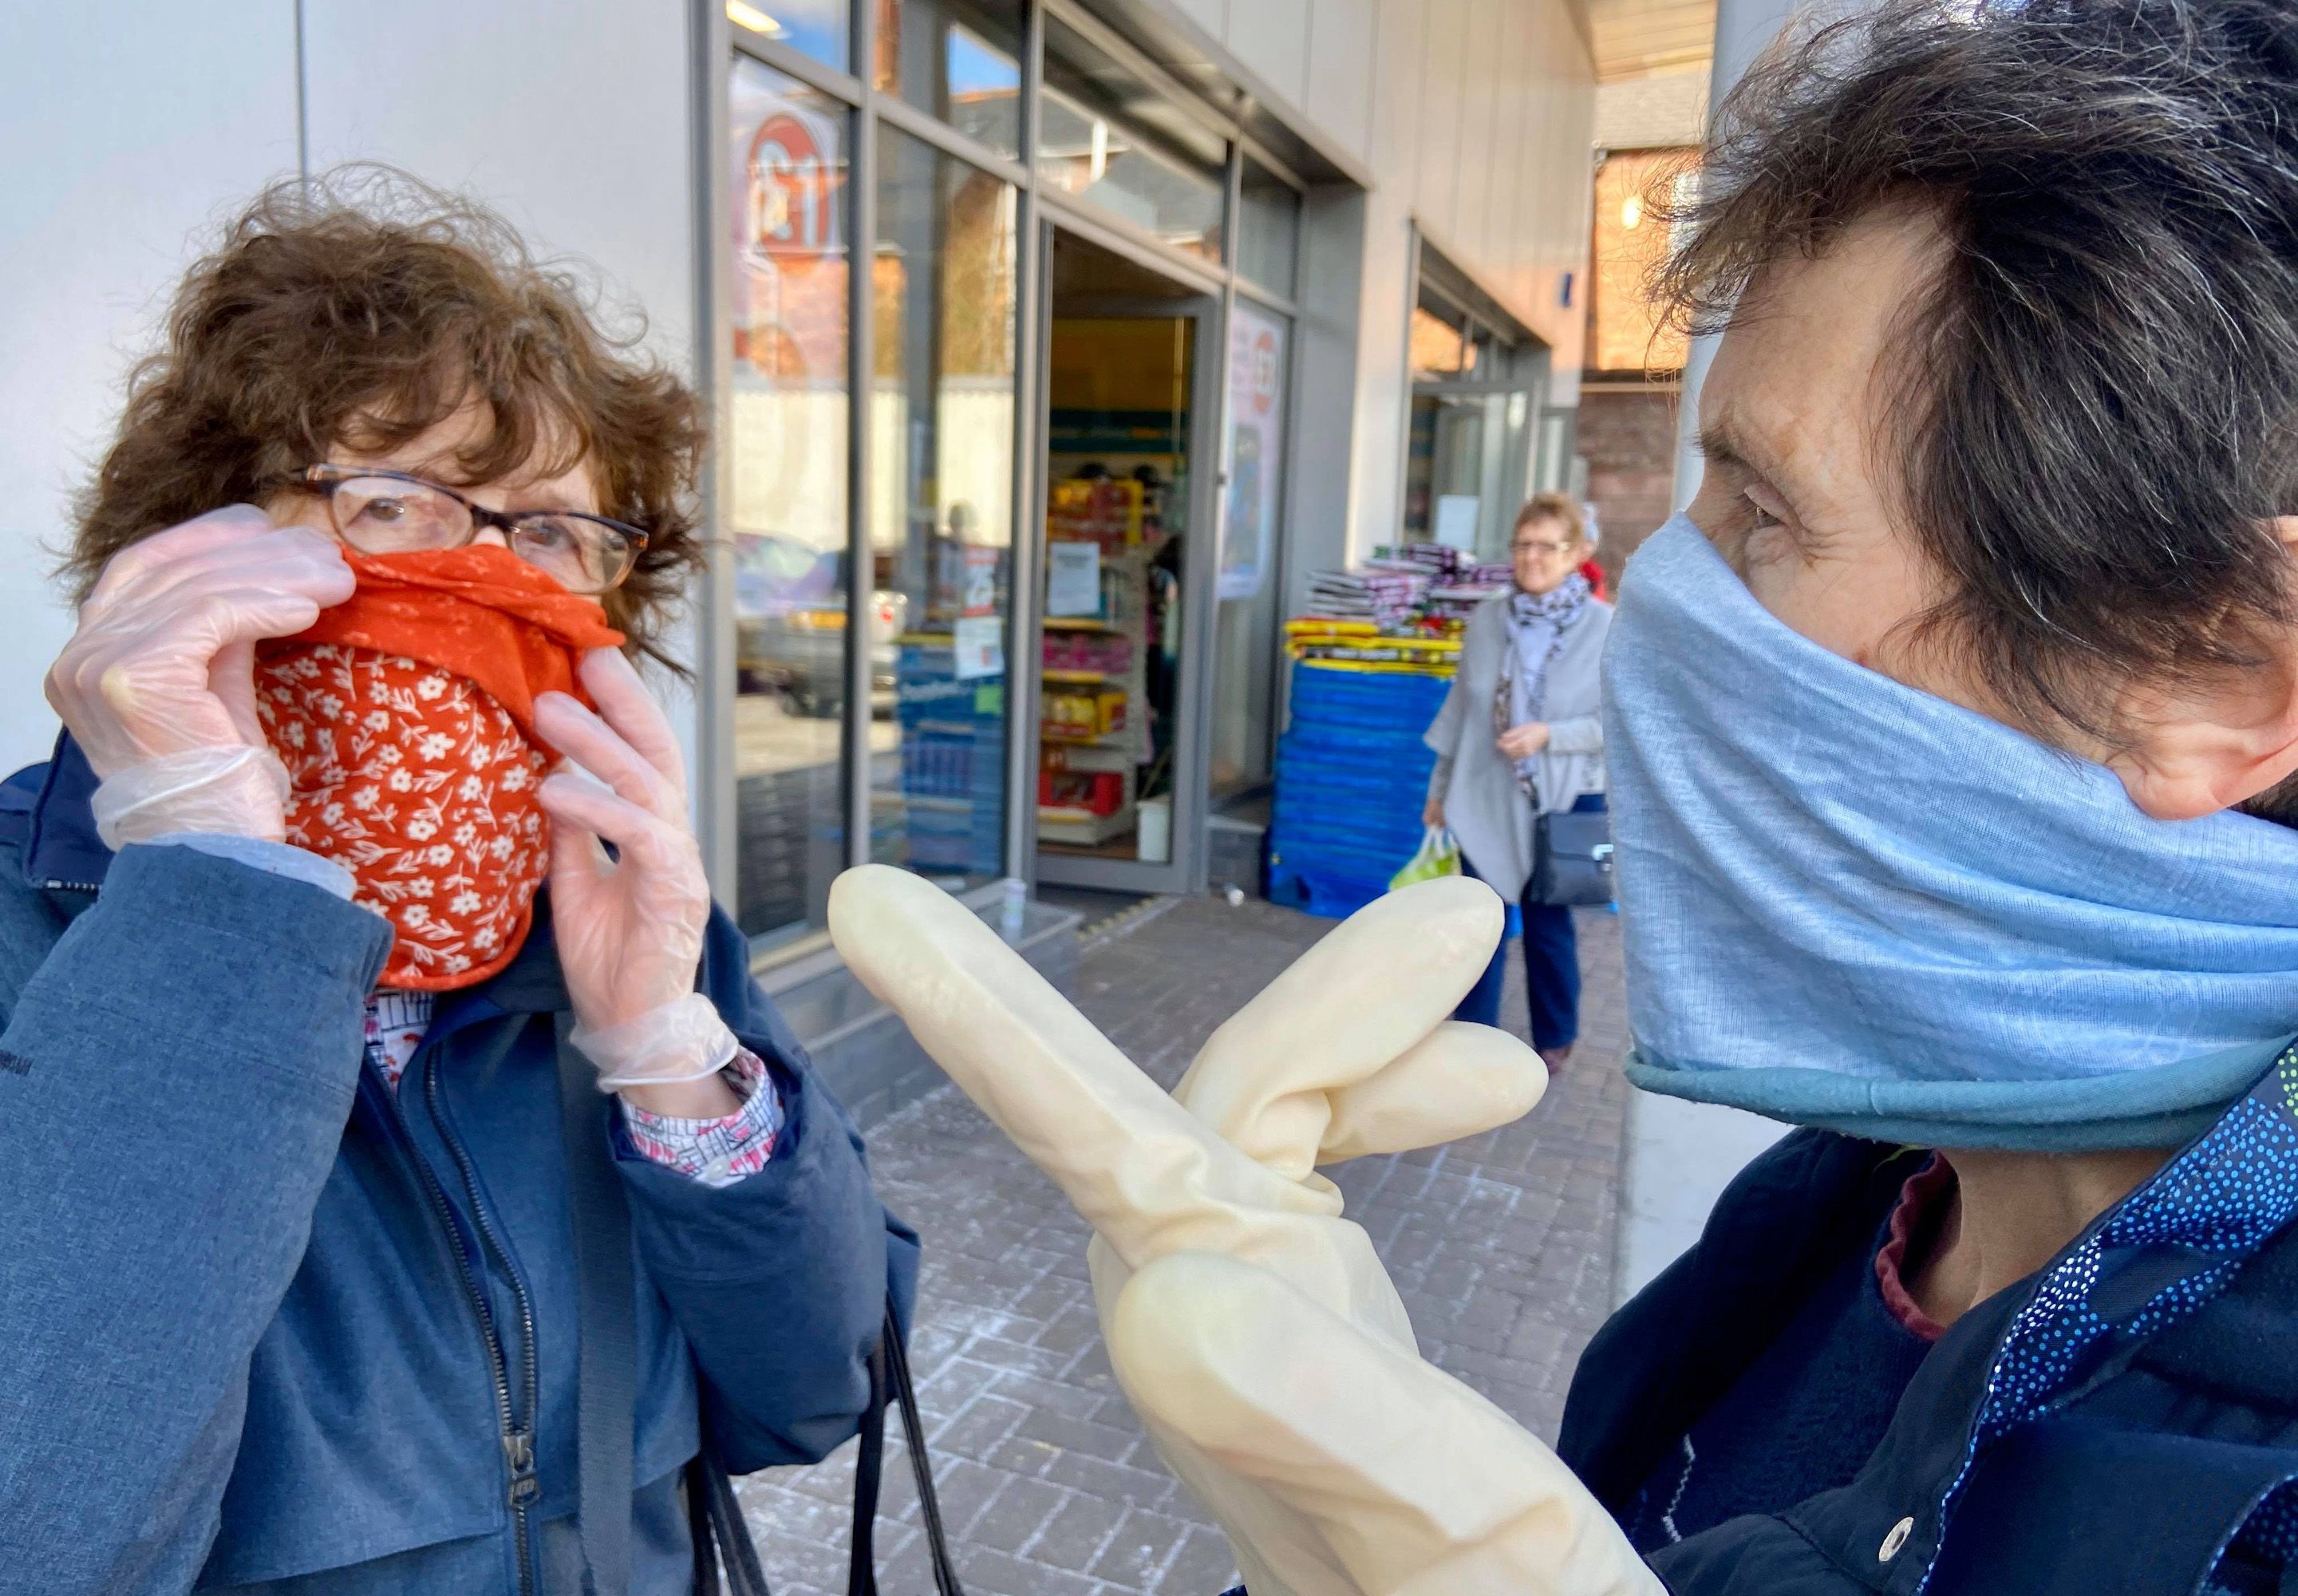 GROUNDS FOR HOPE: Masked shoppers pictured in 2020 during Covid surge.